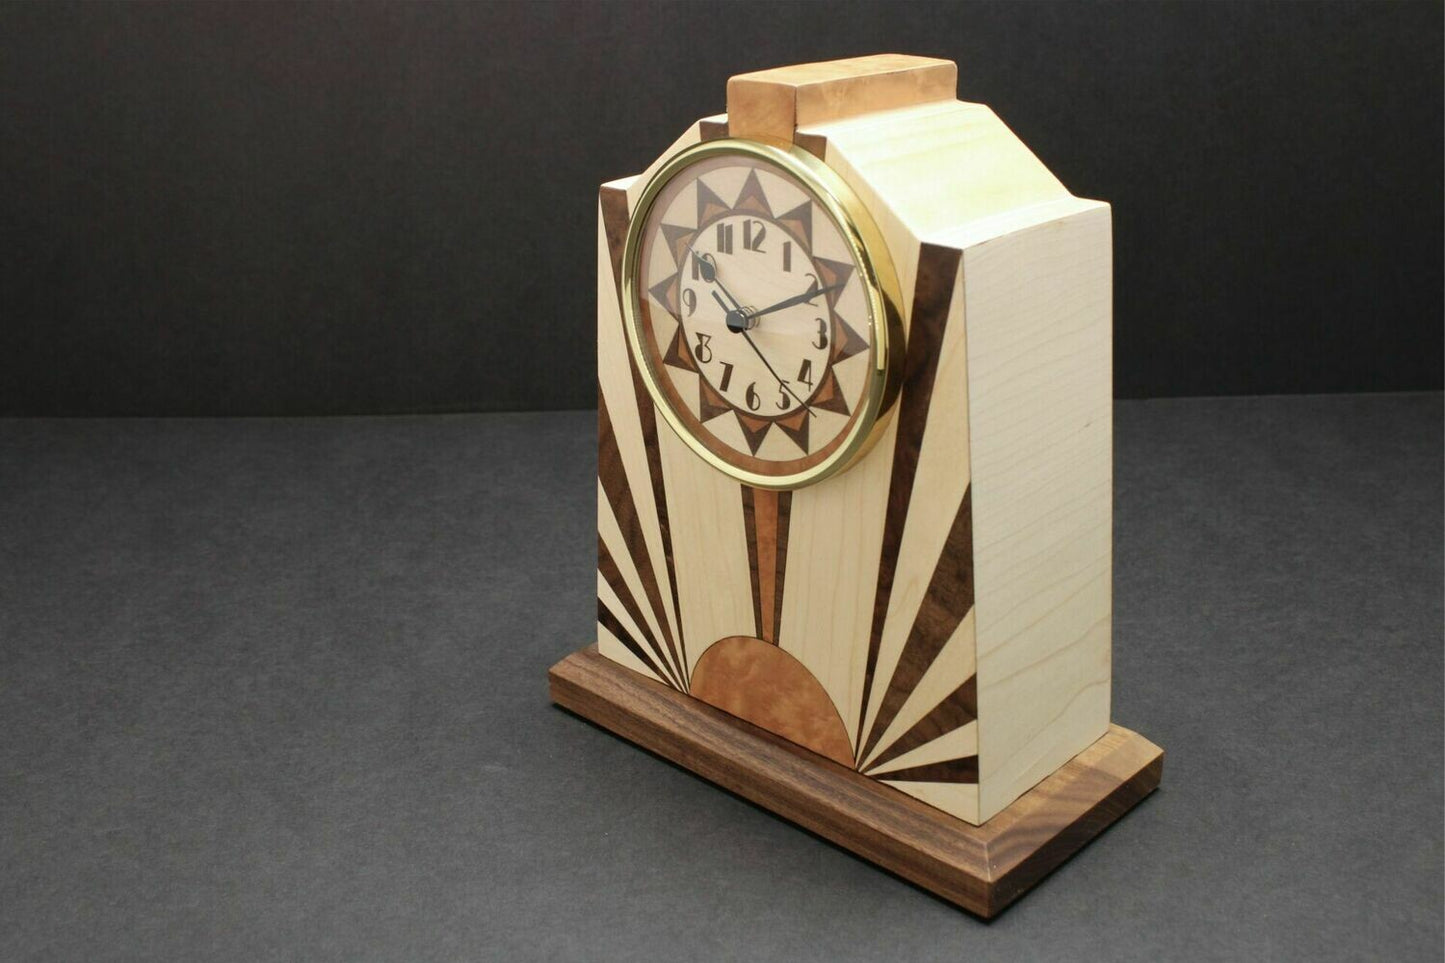 Handcrafted Mantle Clock - Art Deco with Inlaid Rising Sun  MC-7  Made in the U.S.